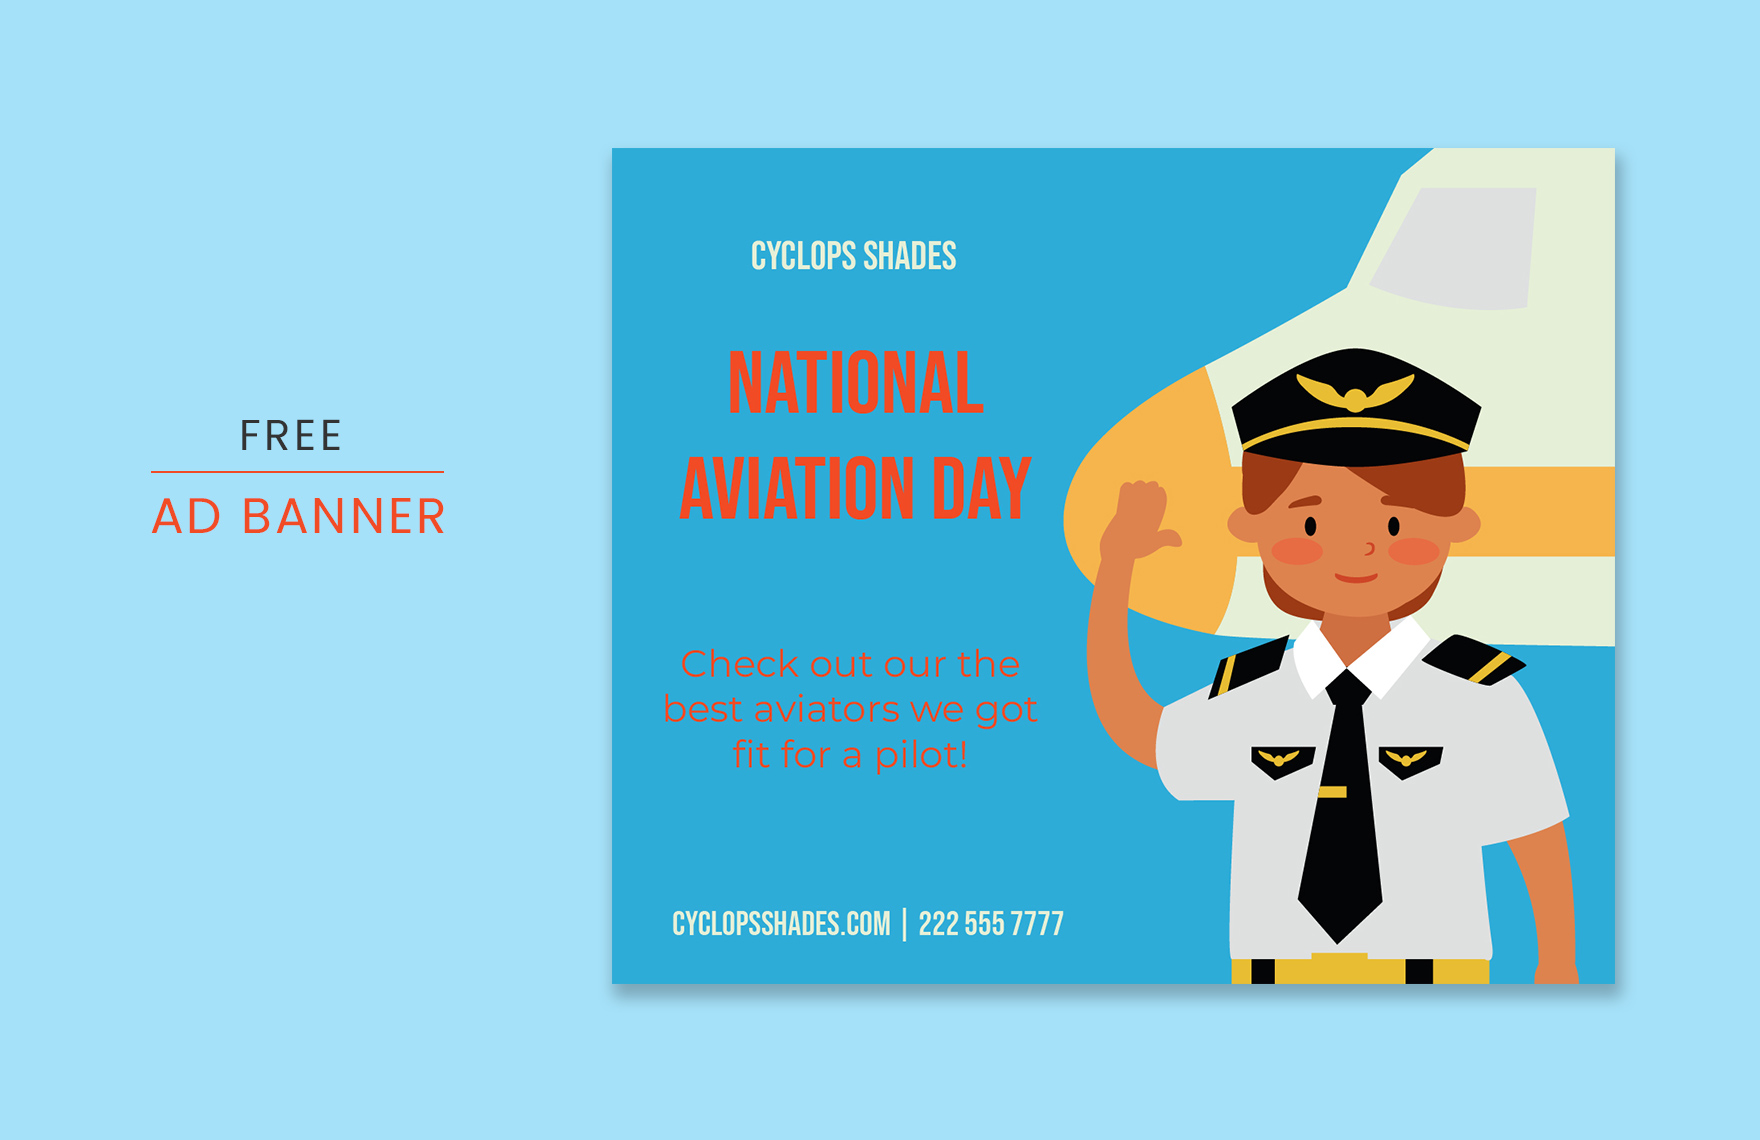 Free National Aviation Day Ad Banner Template in PDF, Illustrator, SVG, JPG